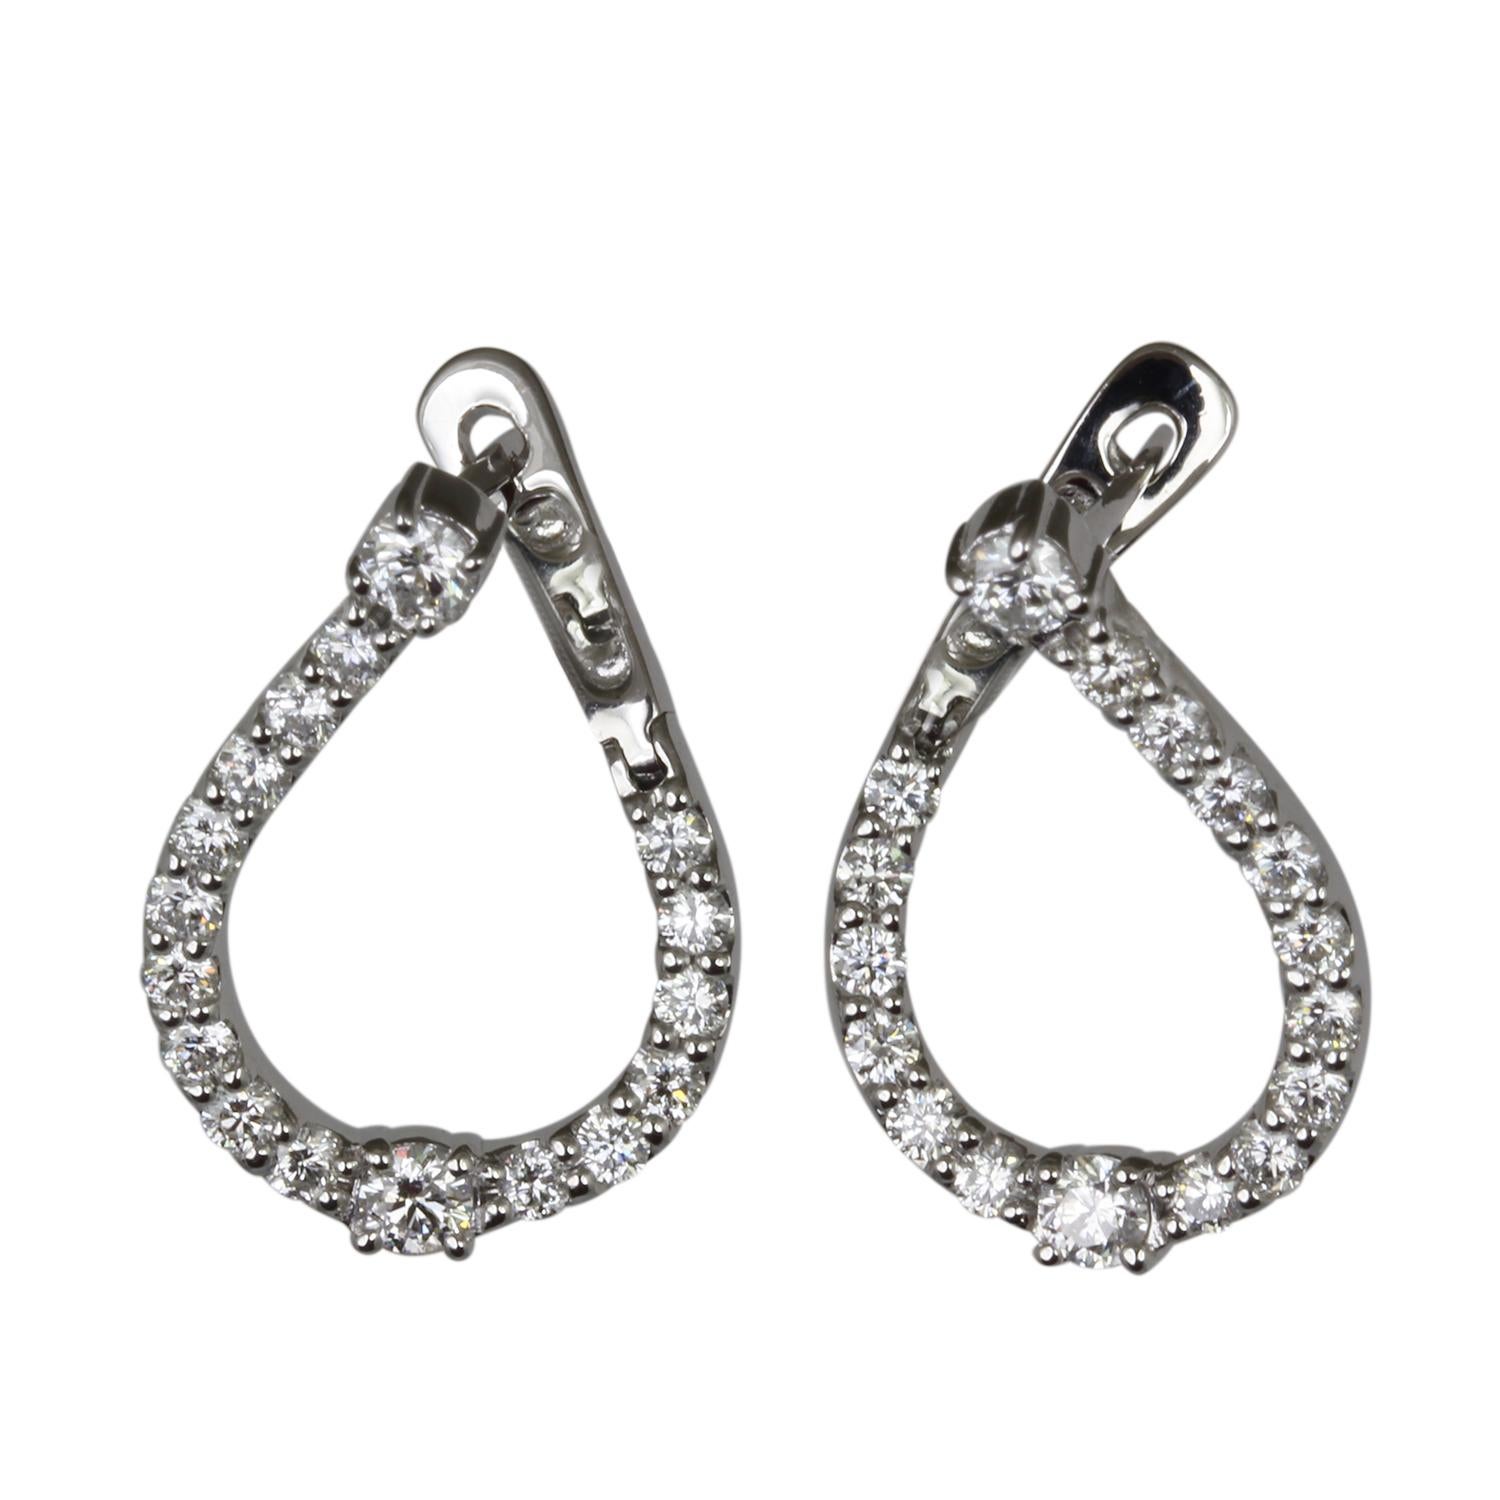 Sparkling like stars in the night sky, diamonds gracefully descend on teardrop-shaped hoops, meticulously crafted from your choice of 14K yellow or white gold. These earrings are designed to enhance your natural radiance, adding a touch of allure to